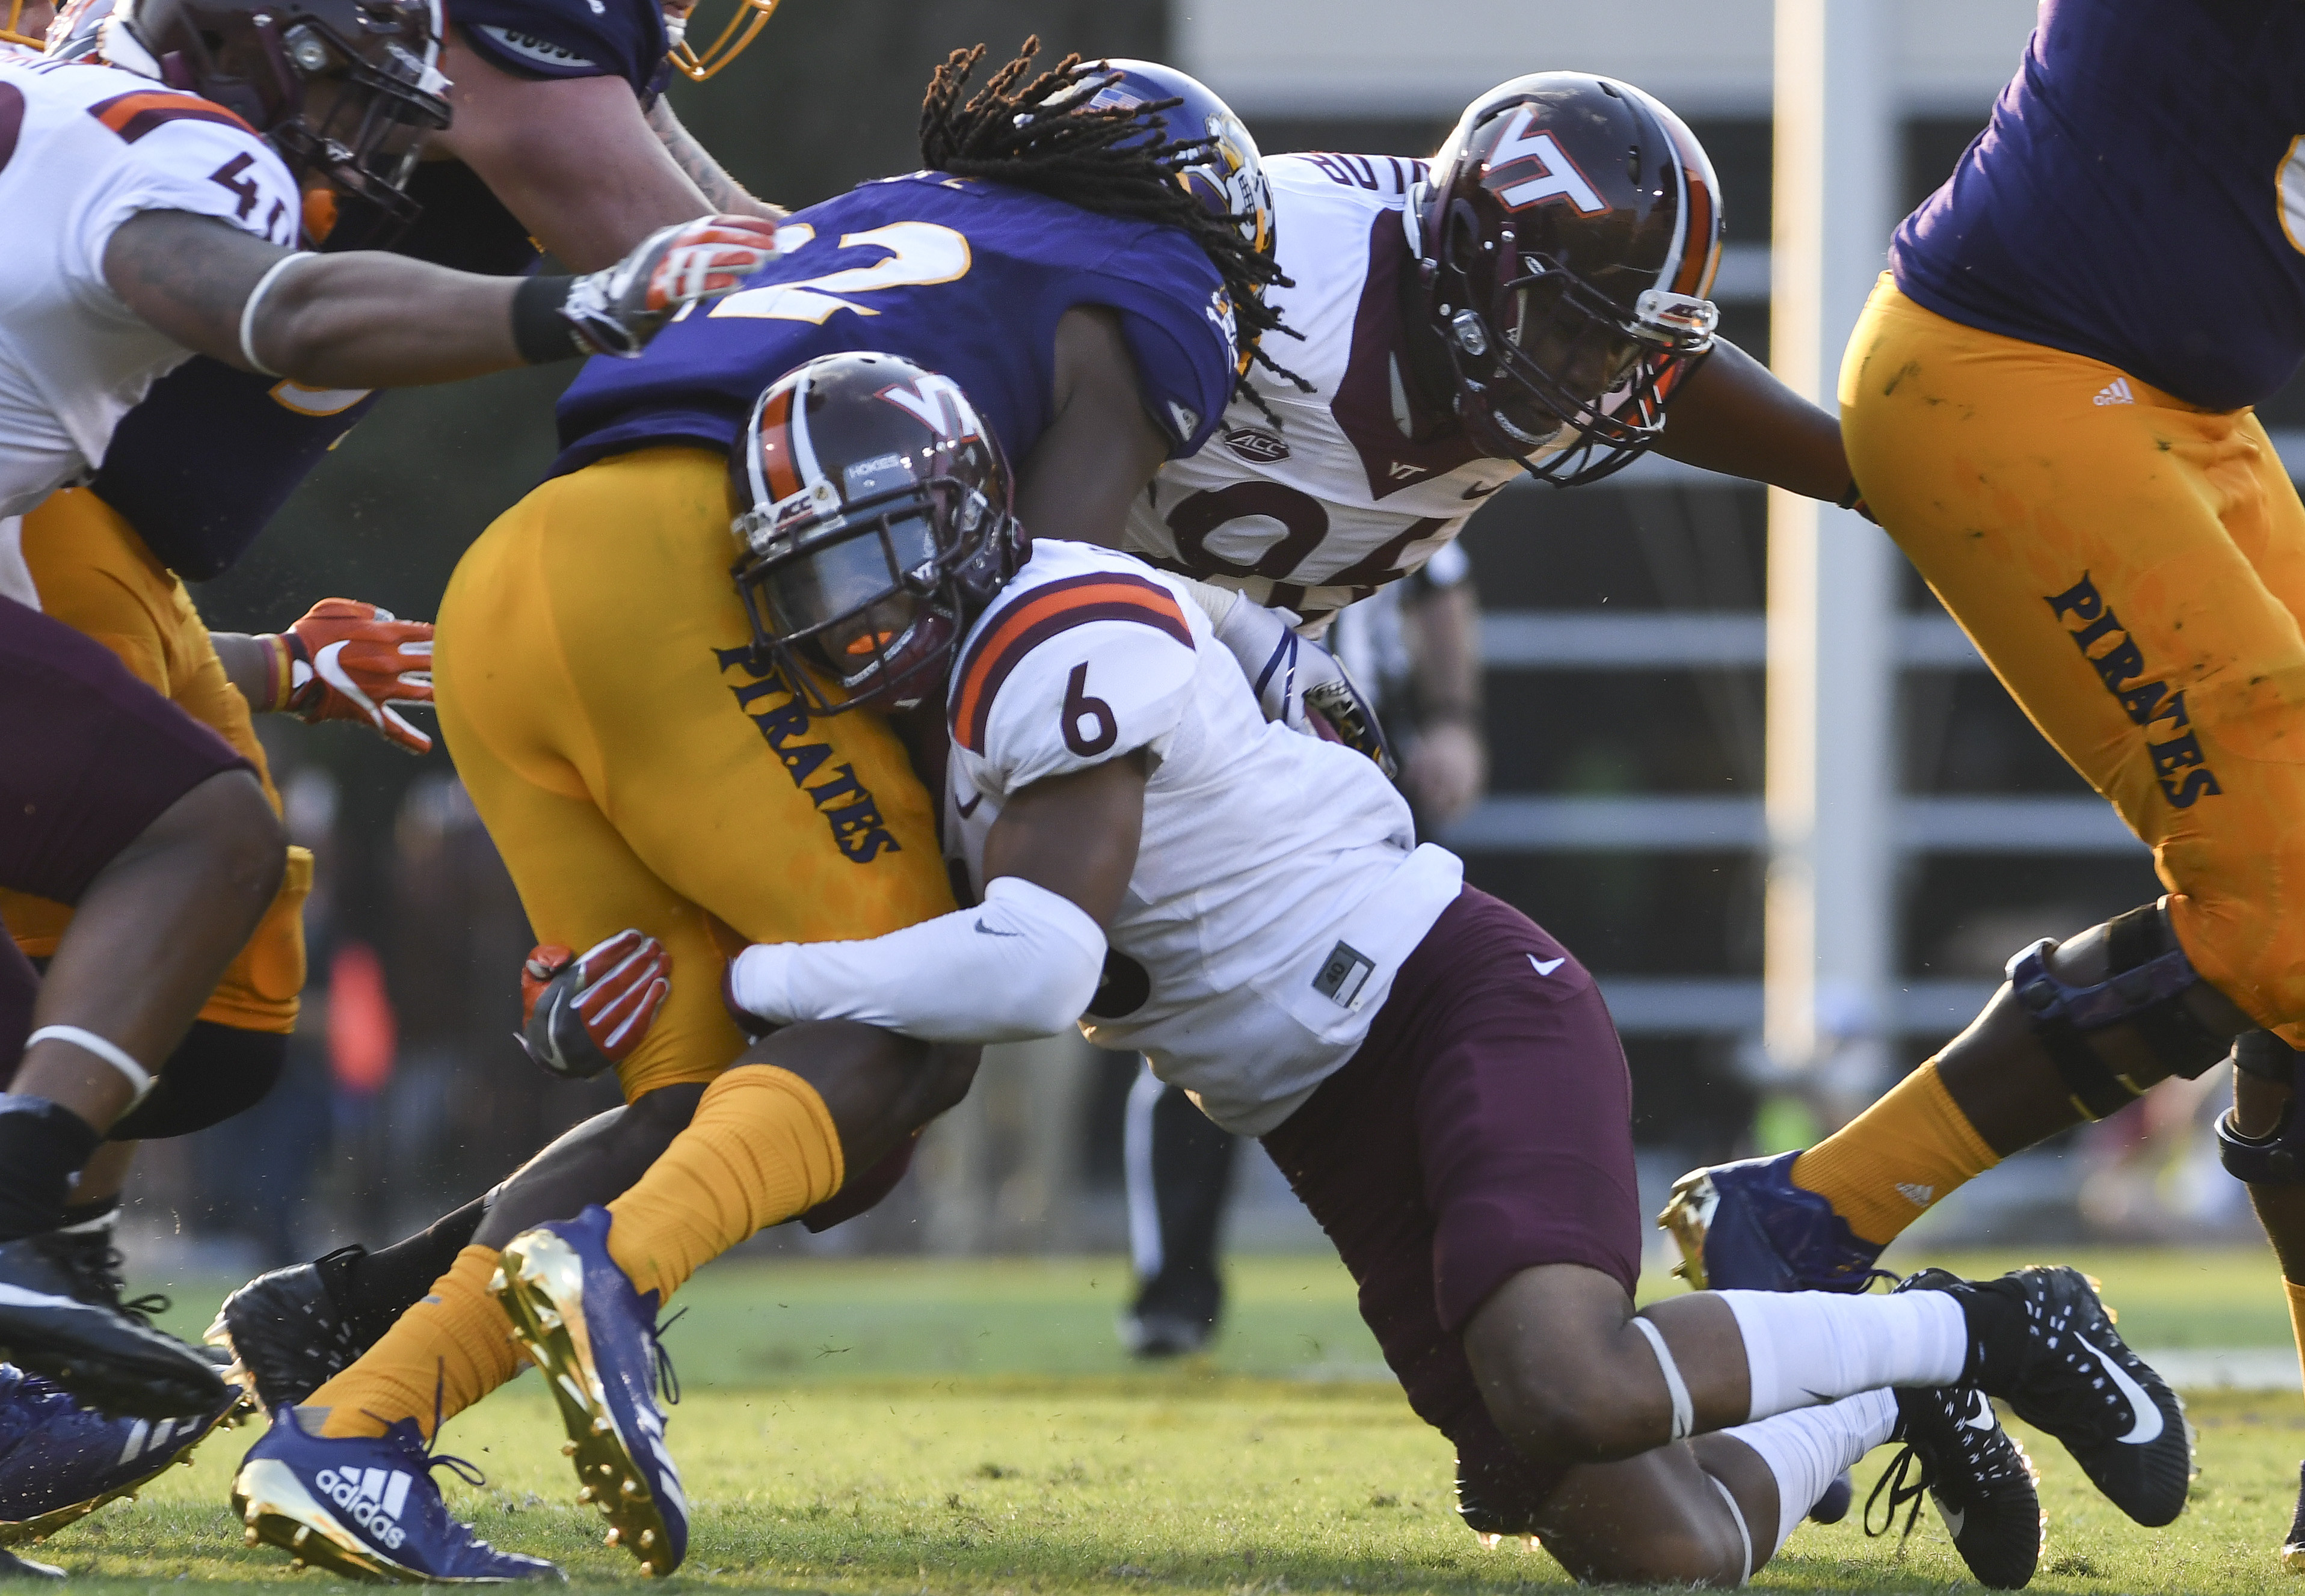 ECU football: Pirates run away from Old Dominion and secure first